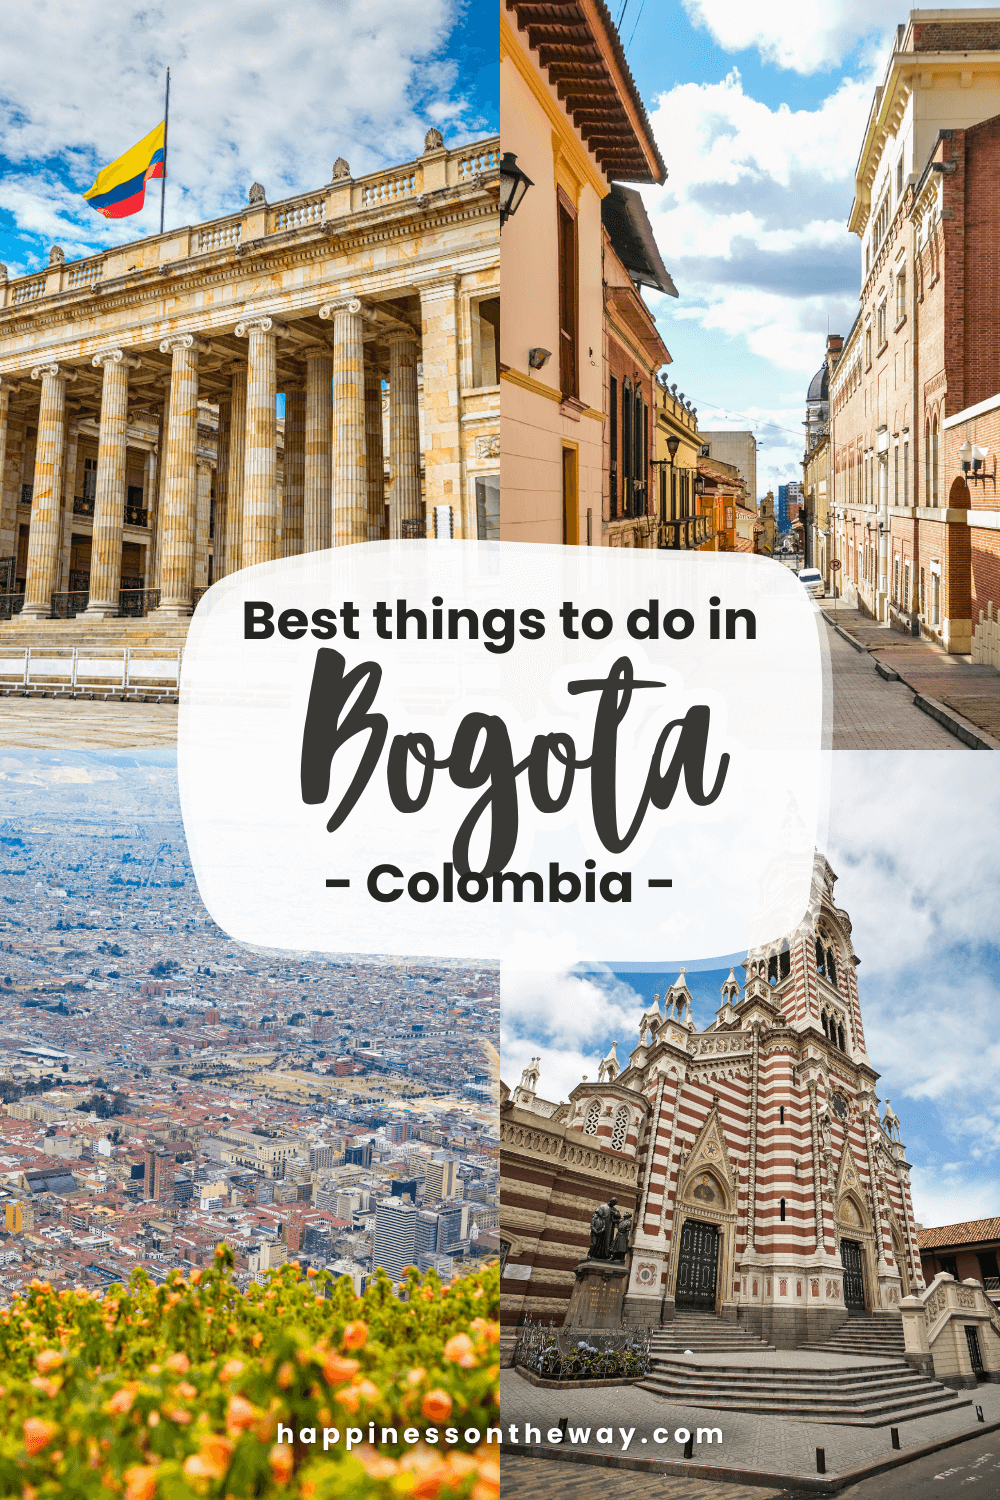 Best Things To Do in Bogota